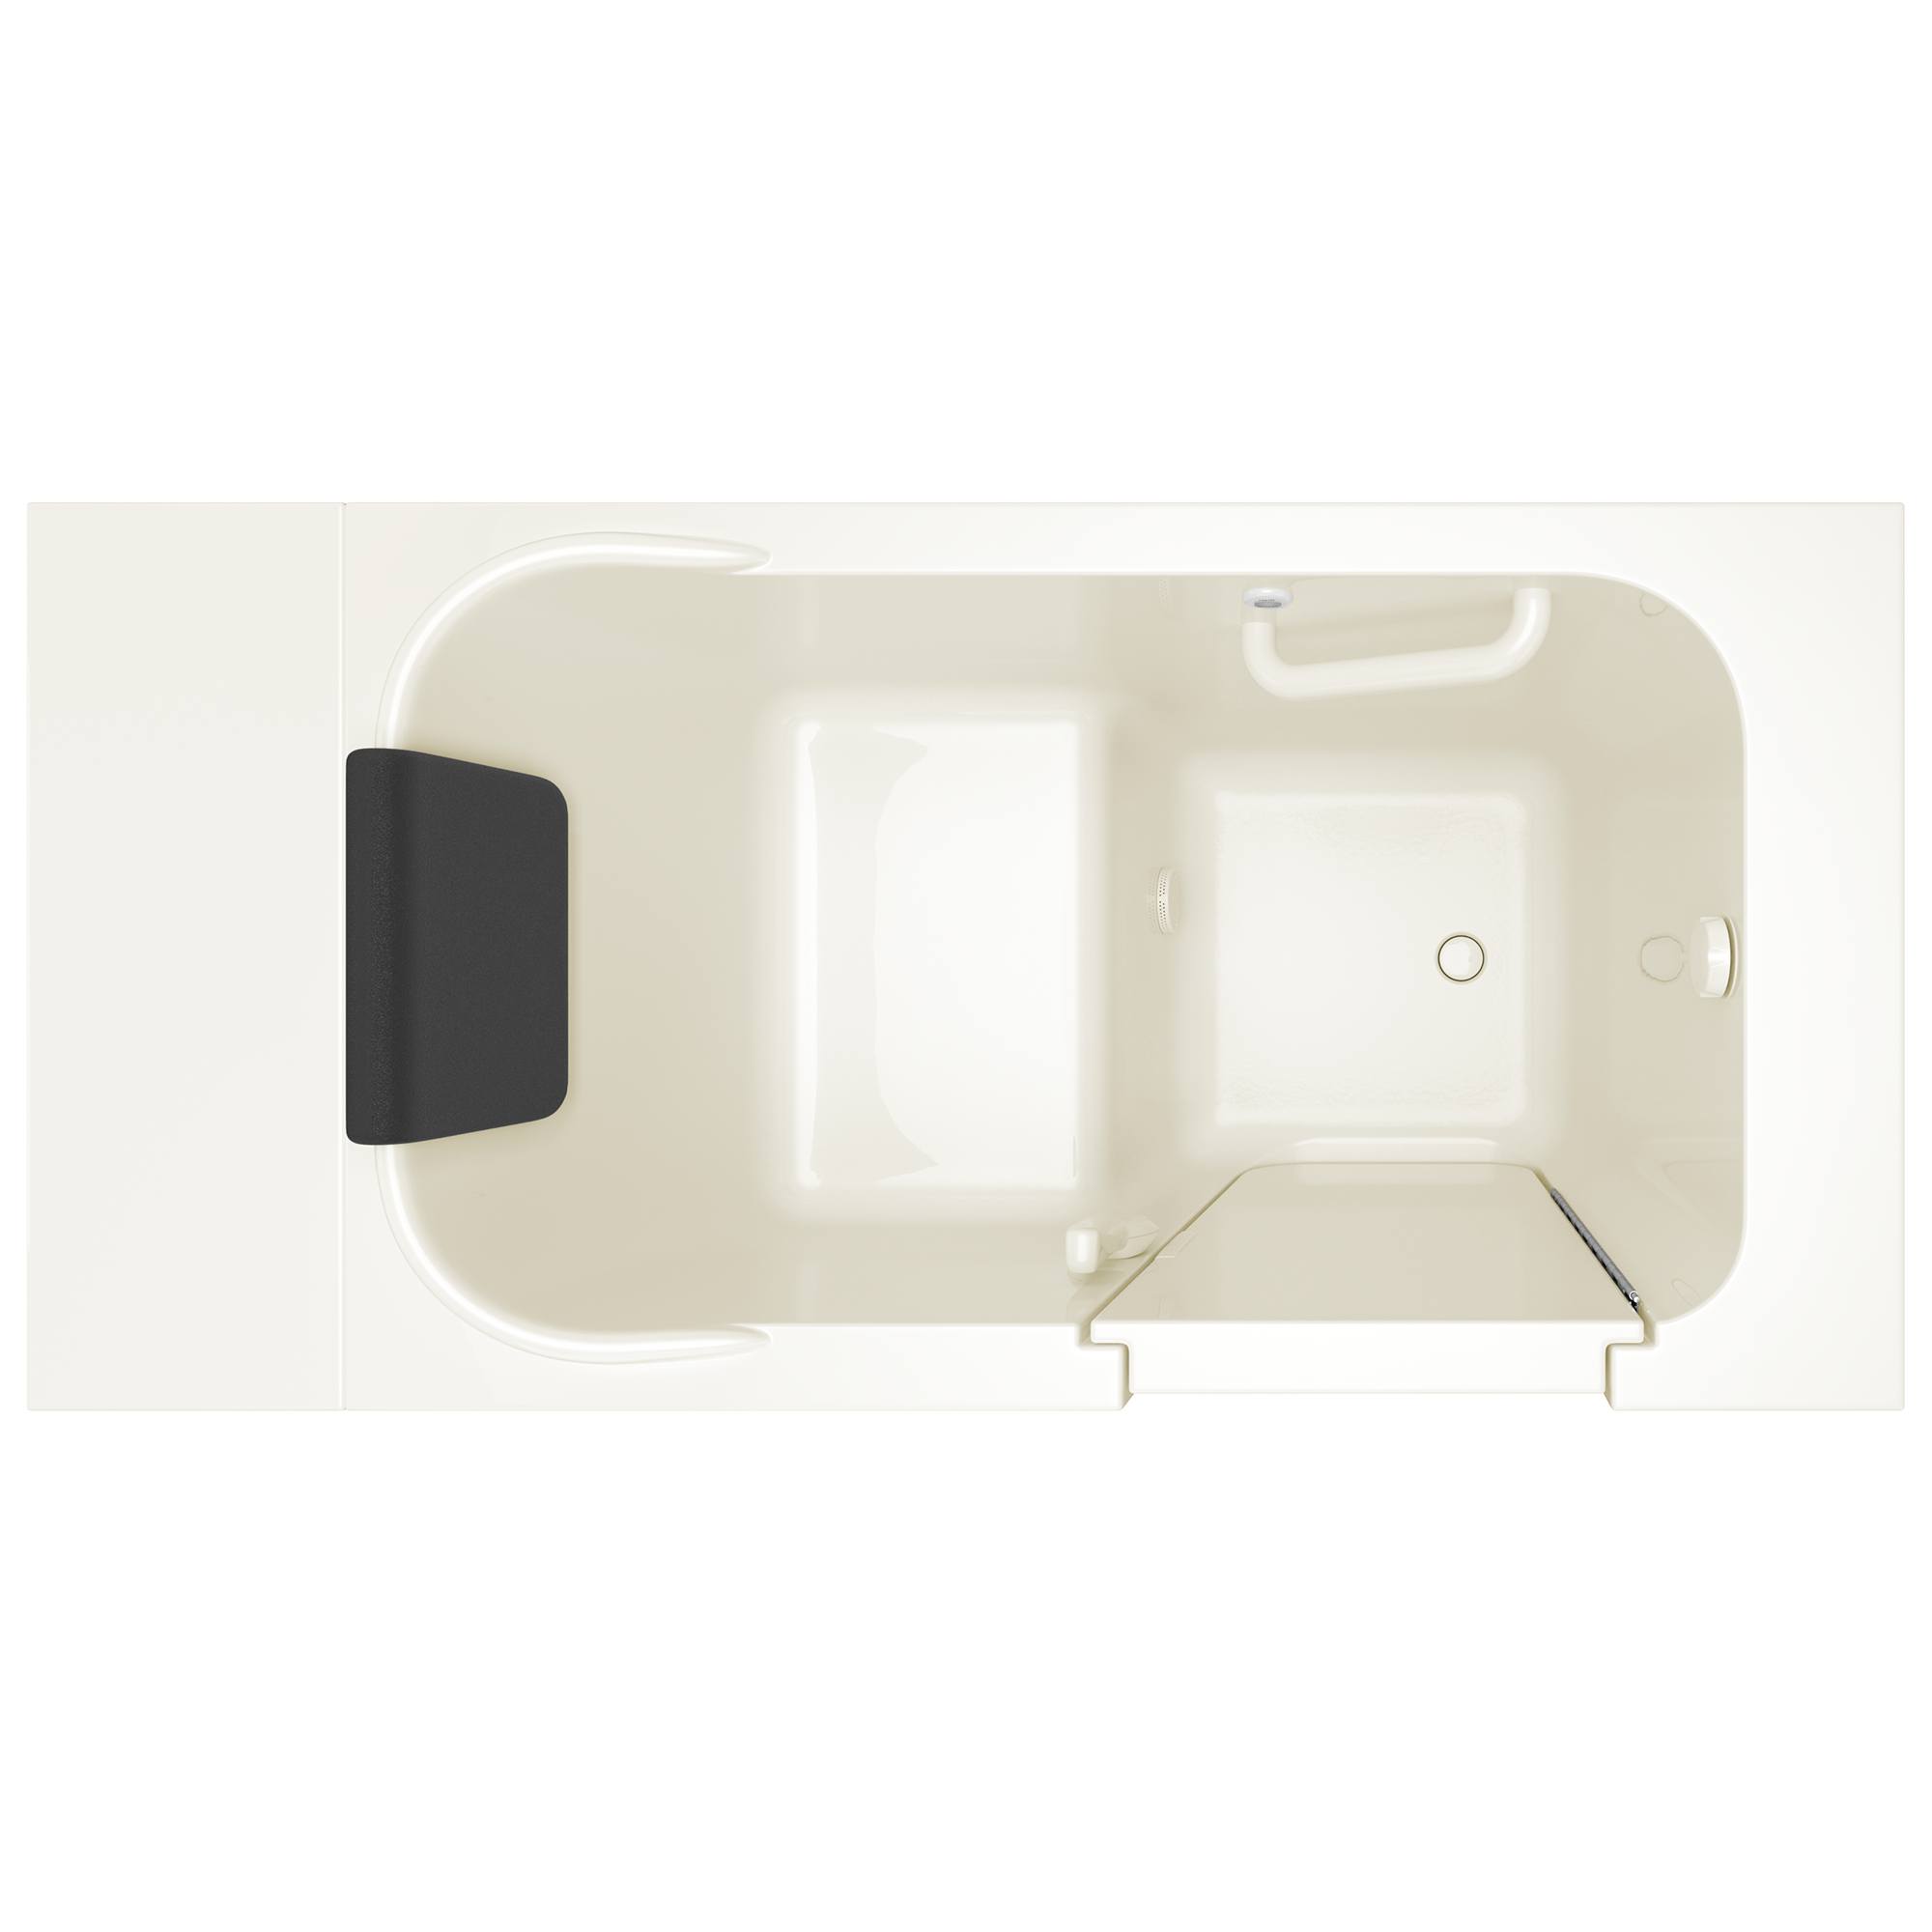 Gelcoat Premium Series 28 x 48-Inch Walk-in Tub With Soaker System - Right-Hand Drain